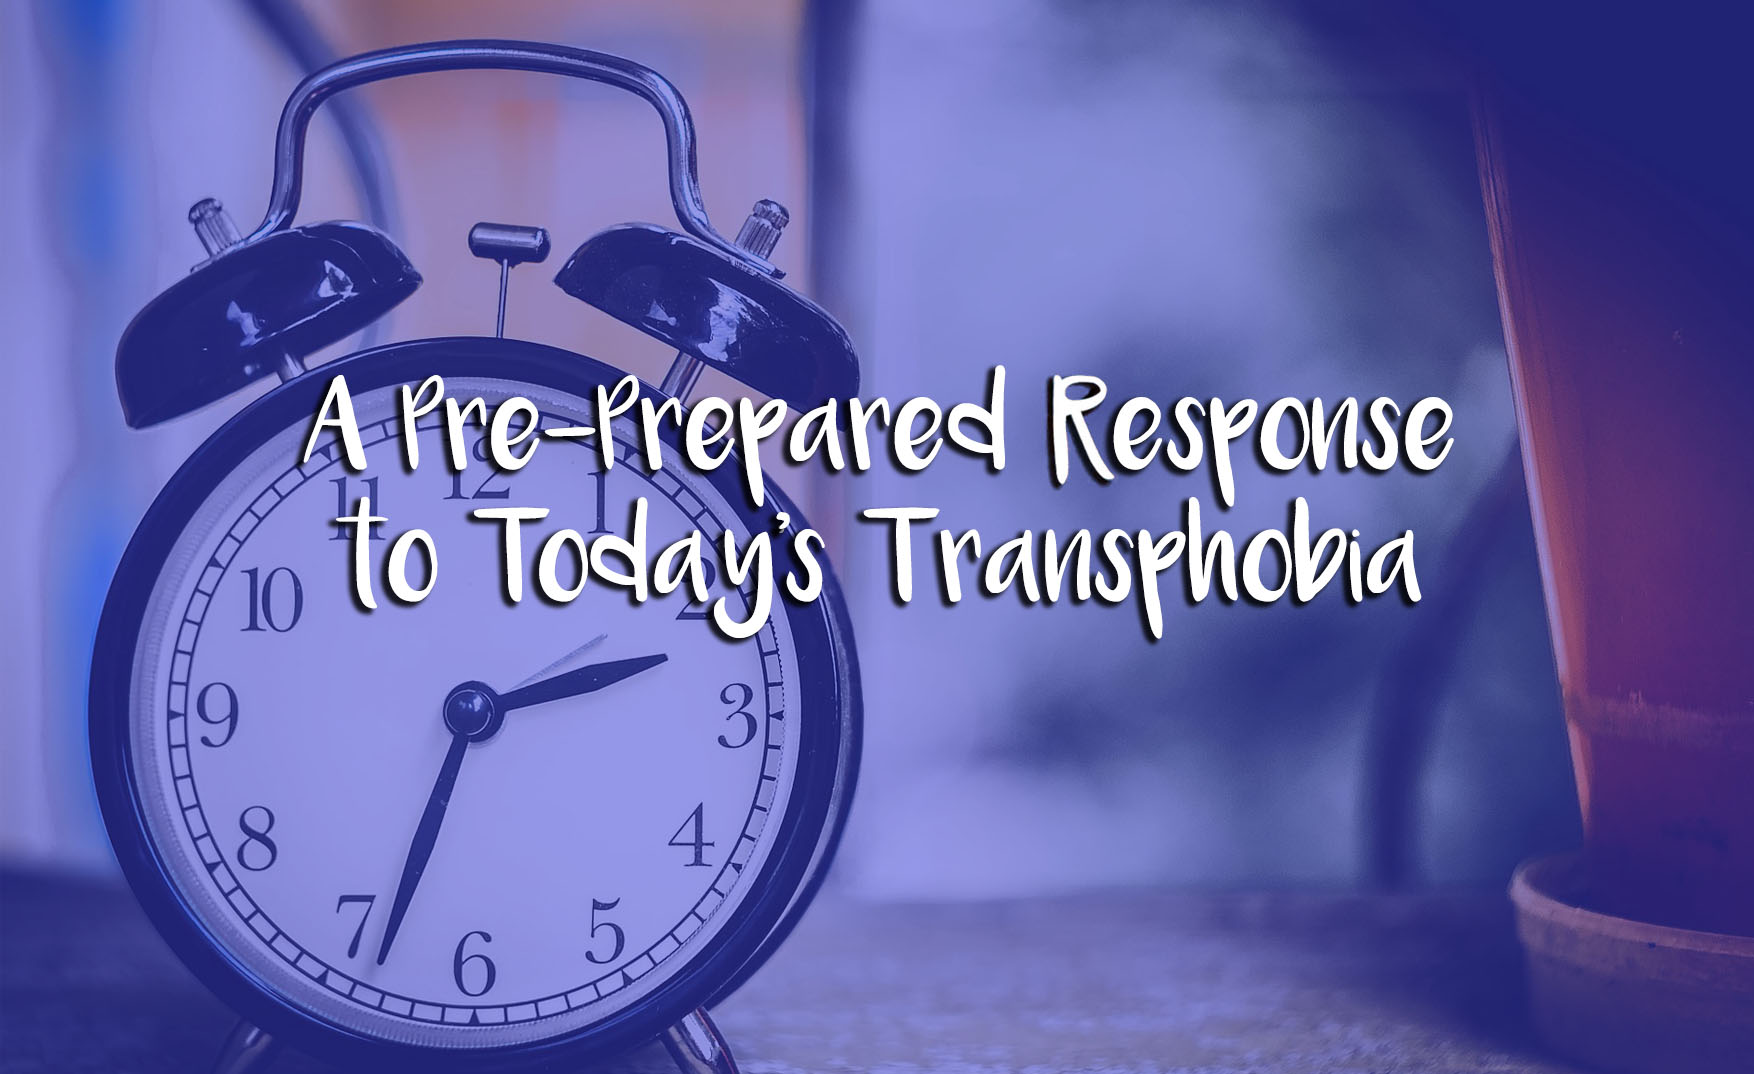 A Pre-Prepared Response to Today’s Transphobia